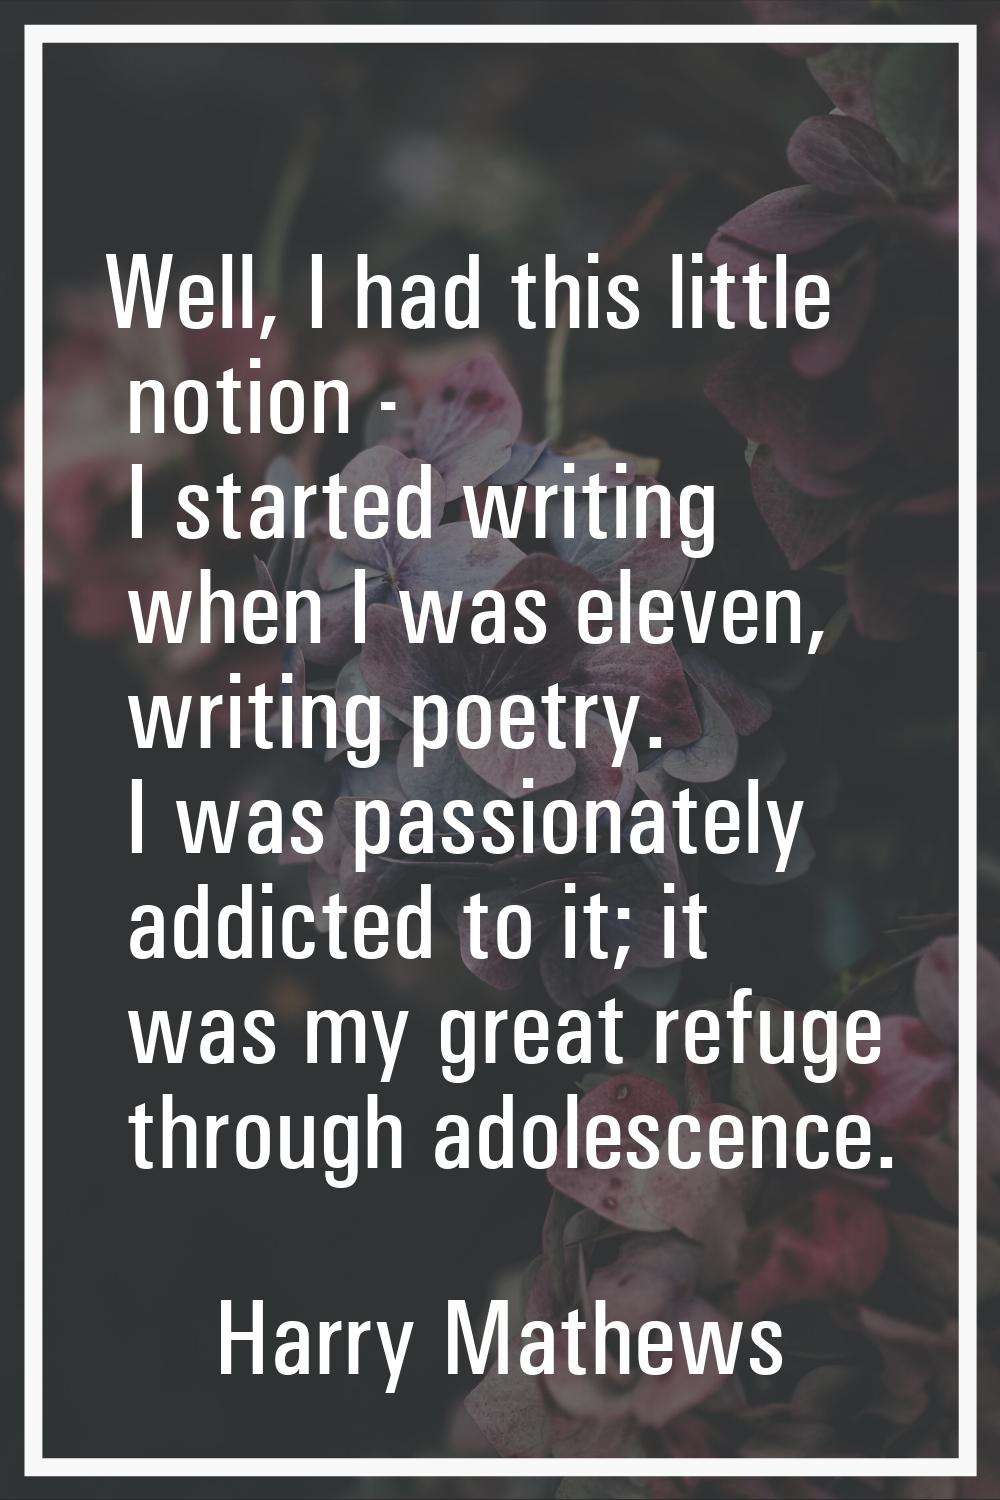 Well, I had this little notion - I started writing when I was eleven, writing poetry. I was passion